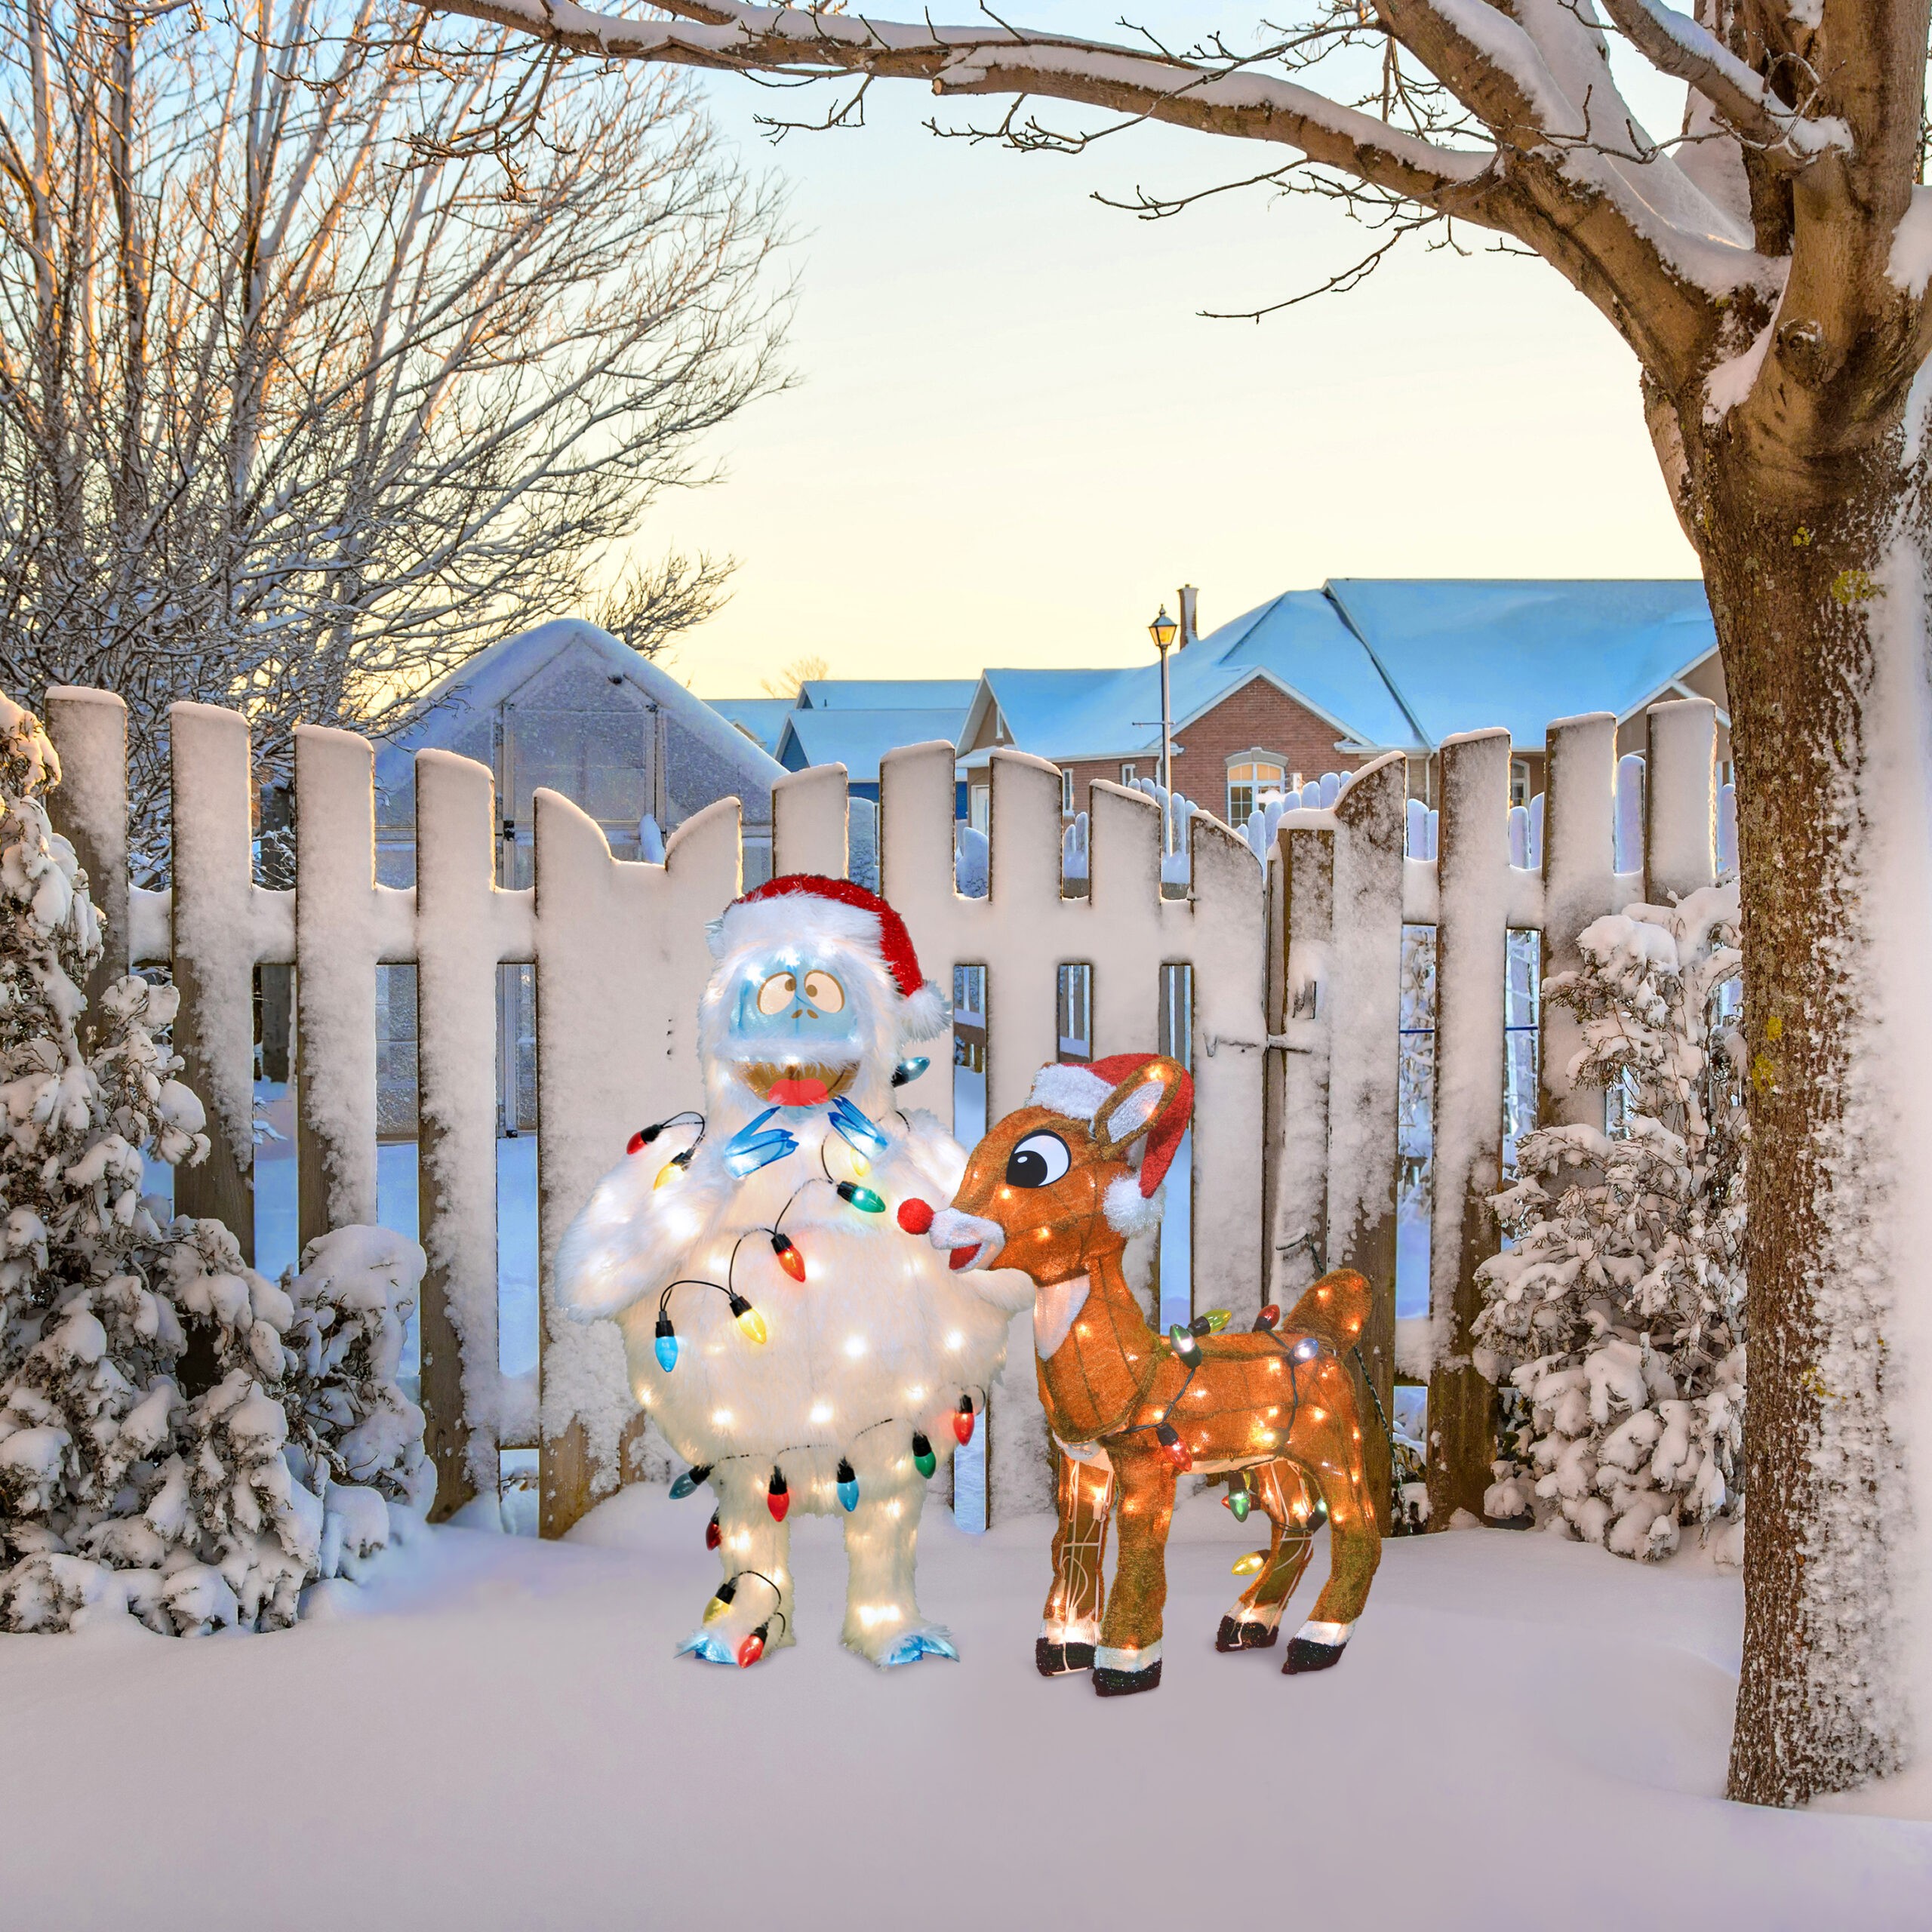 Special KIT: 32in Rudolph 3D PRELIT Yard Art Bumble with Light Strand Plus 24″ Rudolph 3D PRE-LIT Yard Art Standing Rudolph with C9 Lights